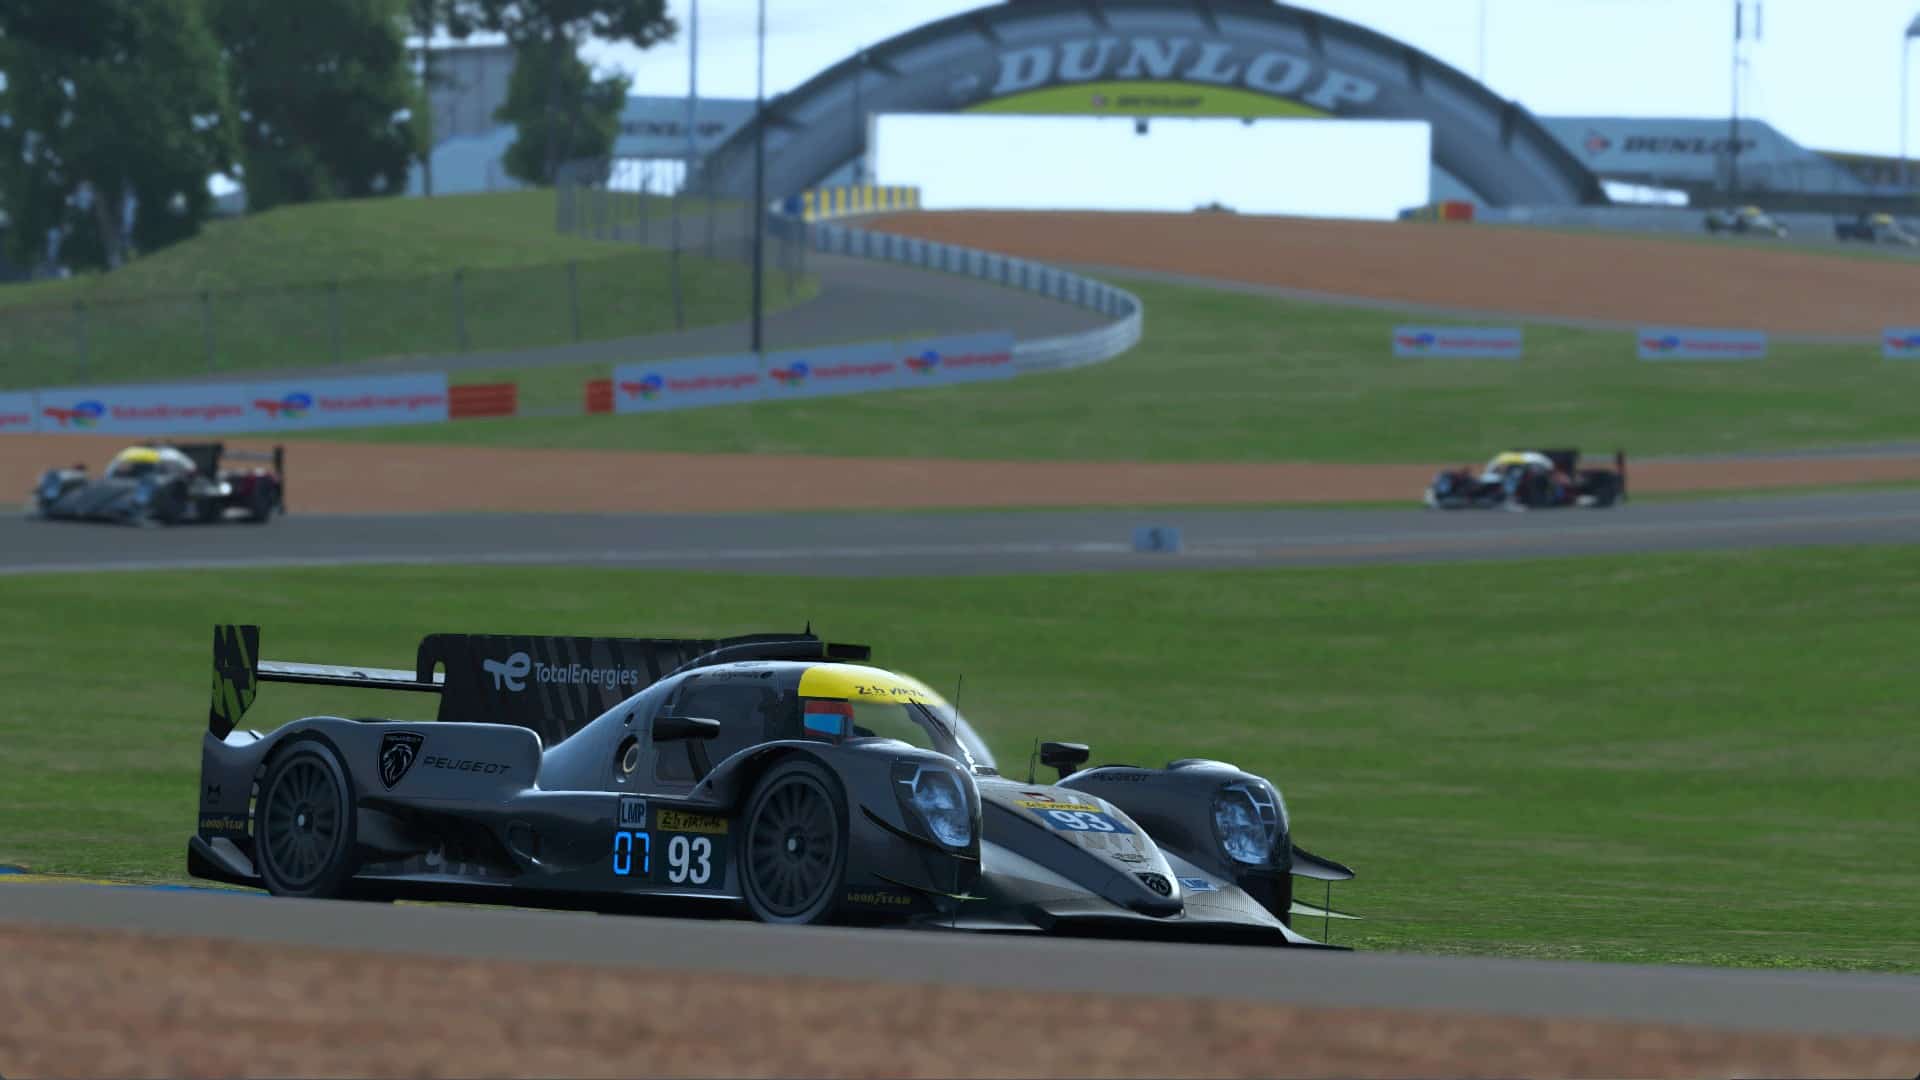 Peugeot Sport will be competing in the 24 Hours of Le Mans Virtual, their first appearance in an esports event